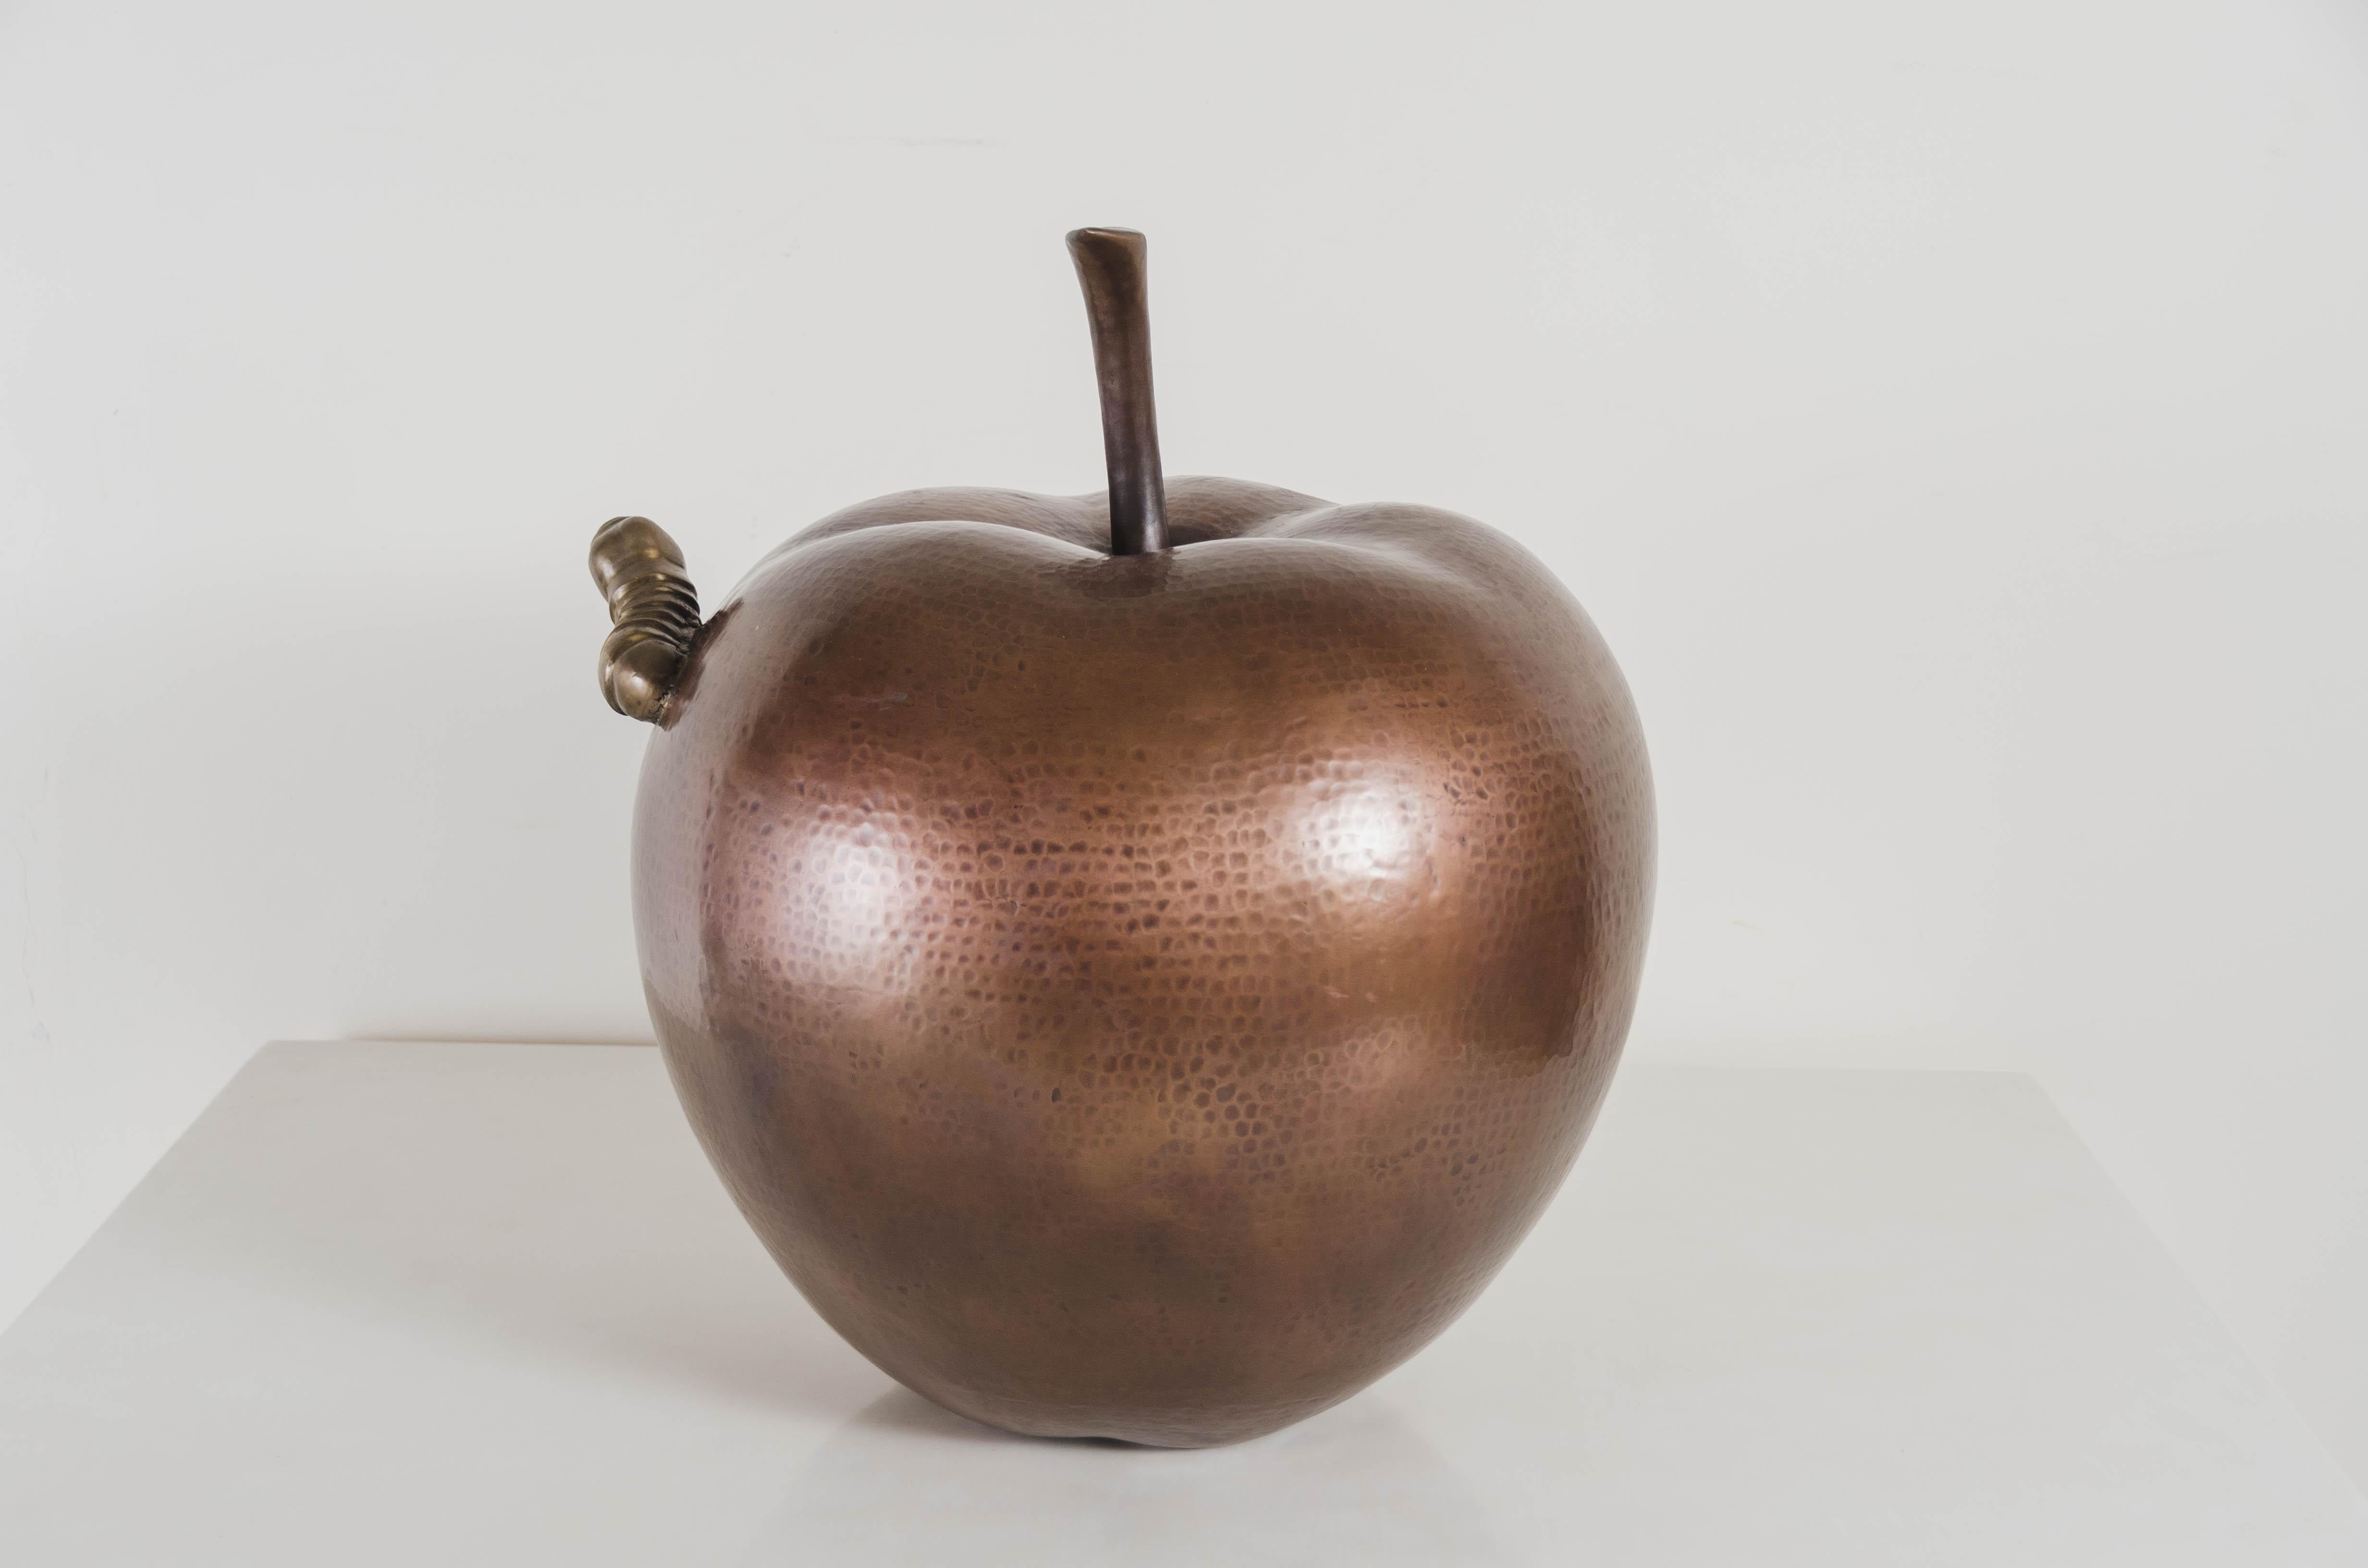 Modern Contemporary Apple w/ Worm Sculpture in Antique Copper and Brass by Robert Kuo For Sale